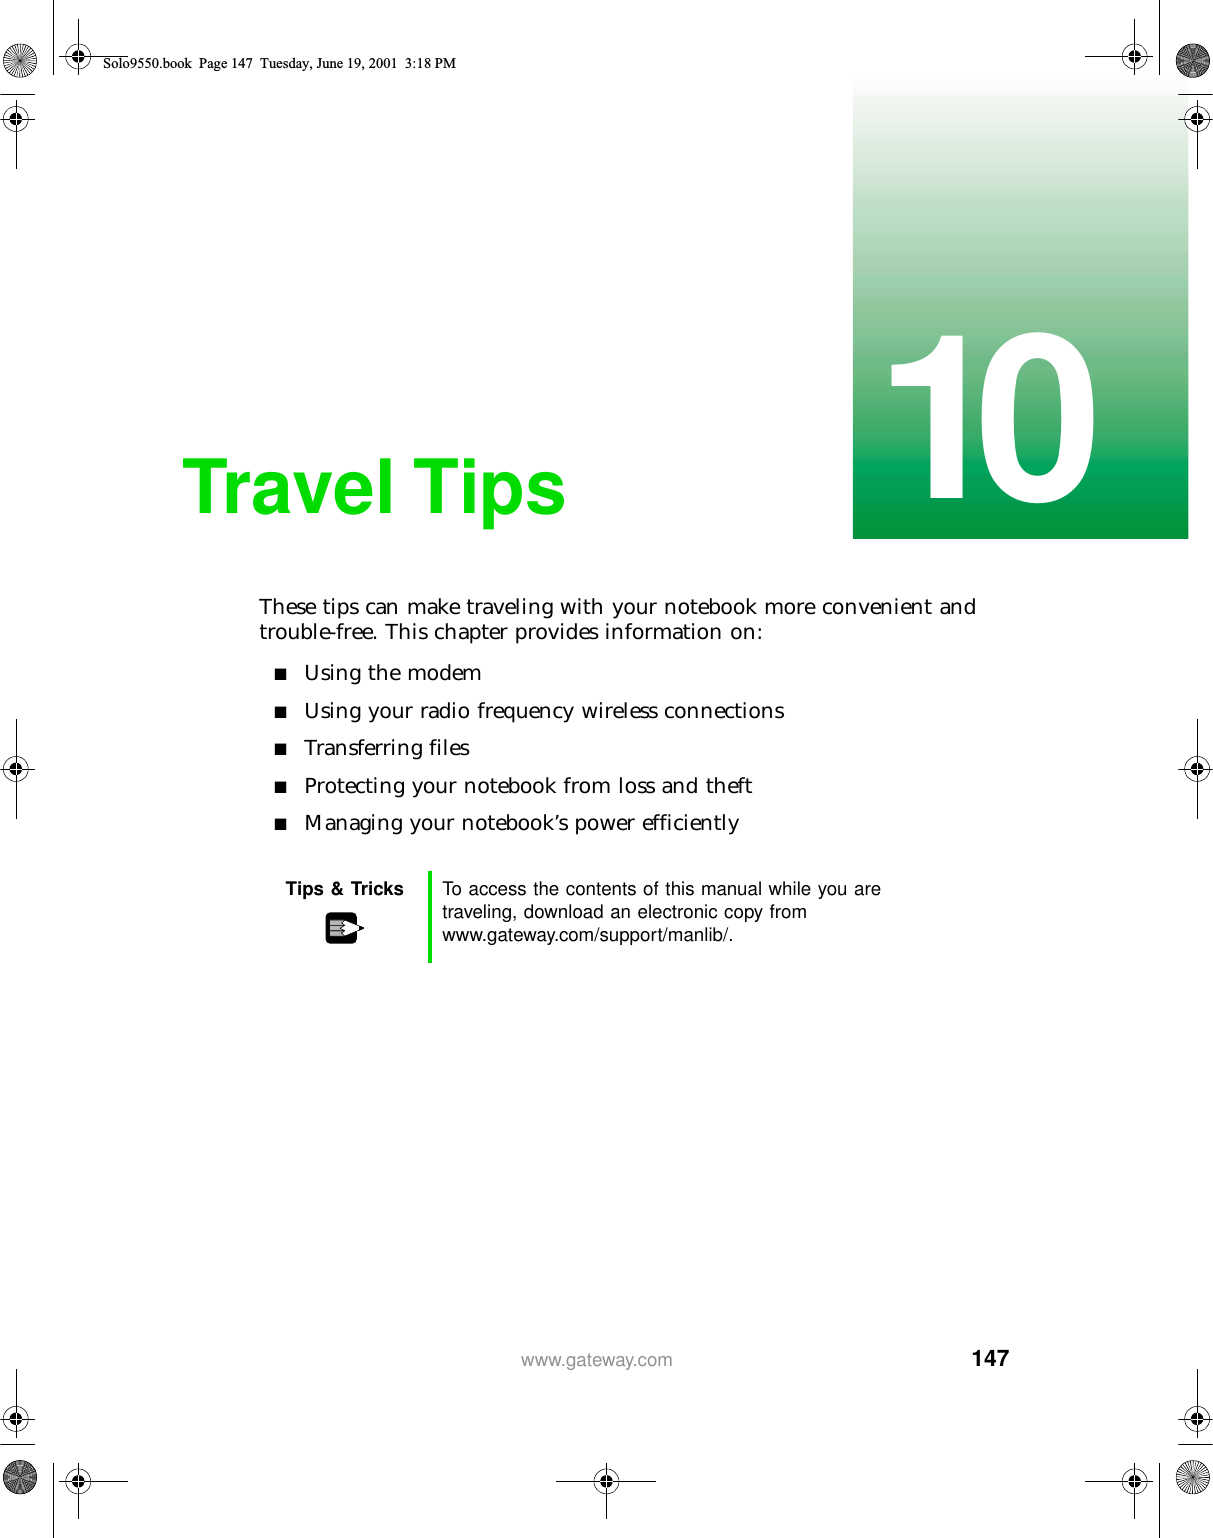 14710www.gateway.comTravel TipsThese tips can make traveling with your notebook more convenient and trouble-free. This chapter provides information on:■Using the modem■Using your radio frequency wireless connections■Transferring files■Protecting your notebook from loss and theft■Managing your notebook’s power efficientlyTips &amp; Tricks To access the contents of this manual while you are traveling, download an electronic copy from www.gateway.com/support/manlib/.Solo9550.book Page 147 Tuesday, June 19, 2001 3:18 PM